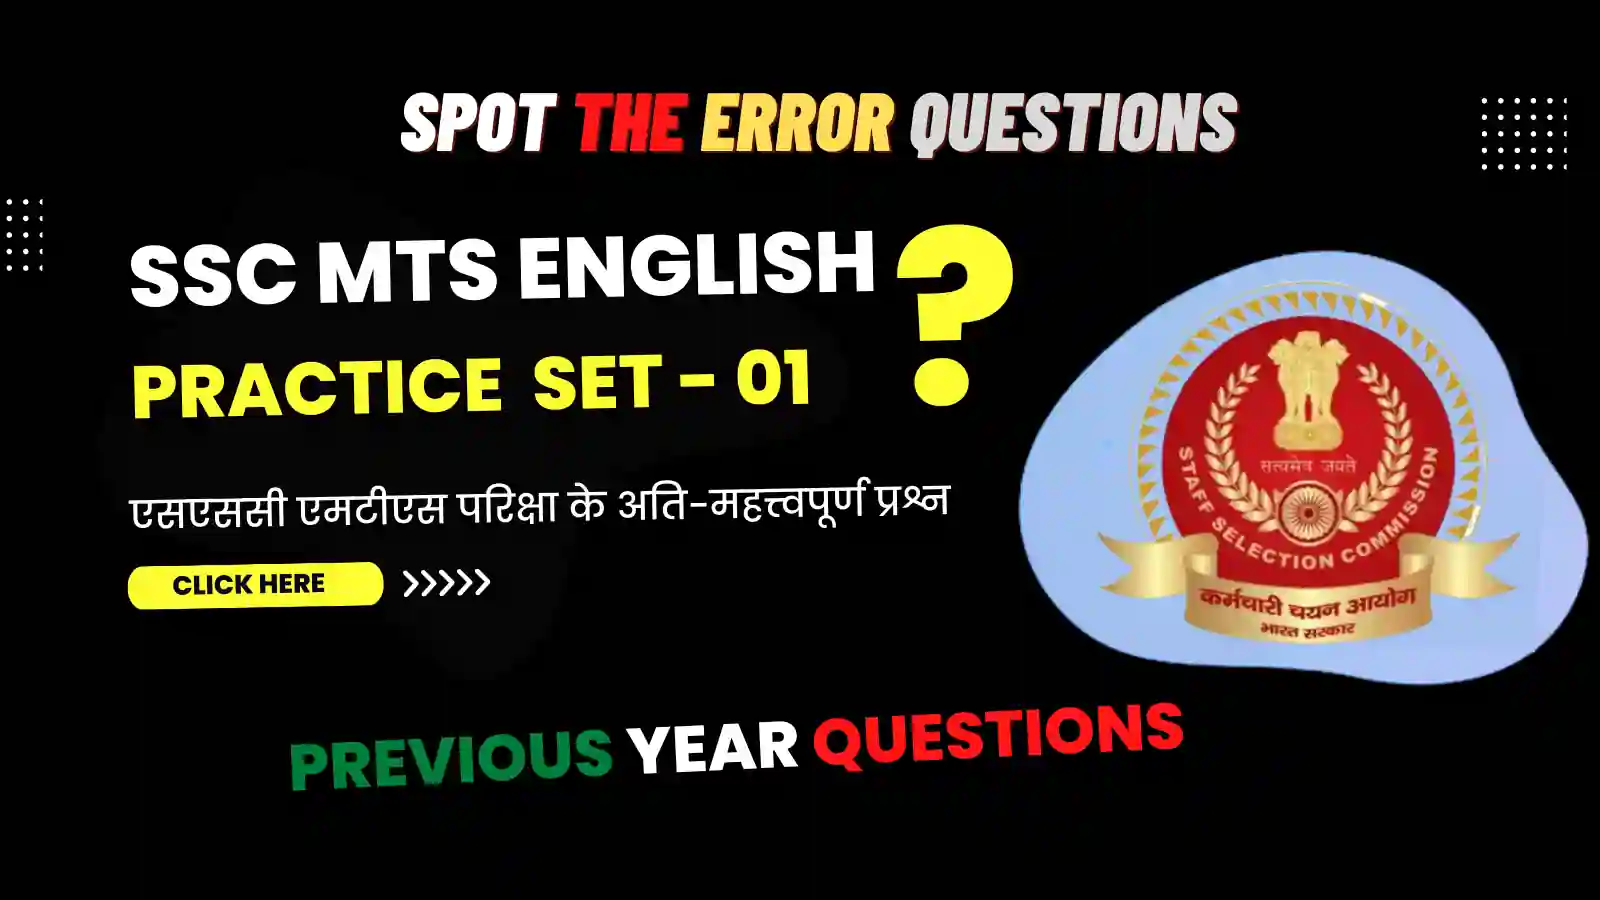 SSC MTS English Practice Set - 01 | Spot The Error Questions With Explanation